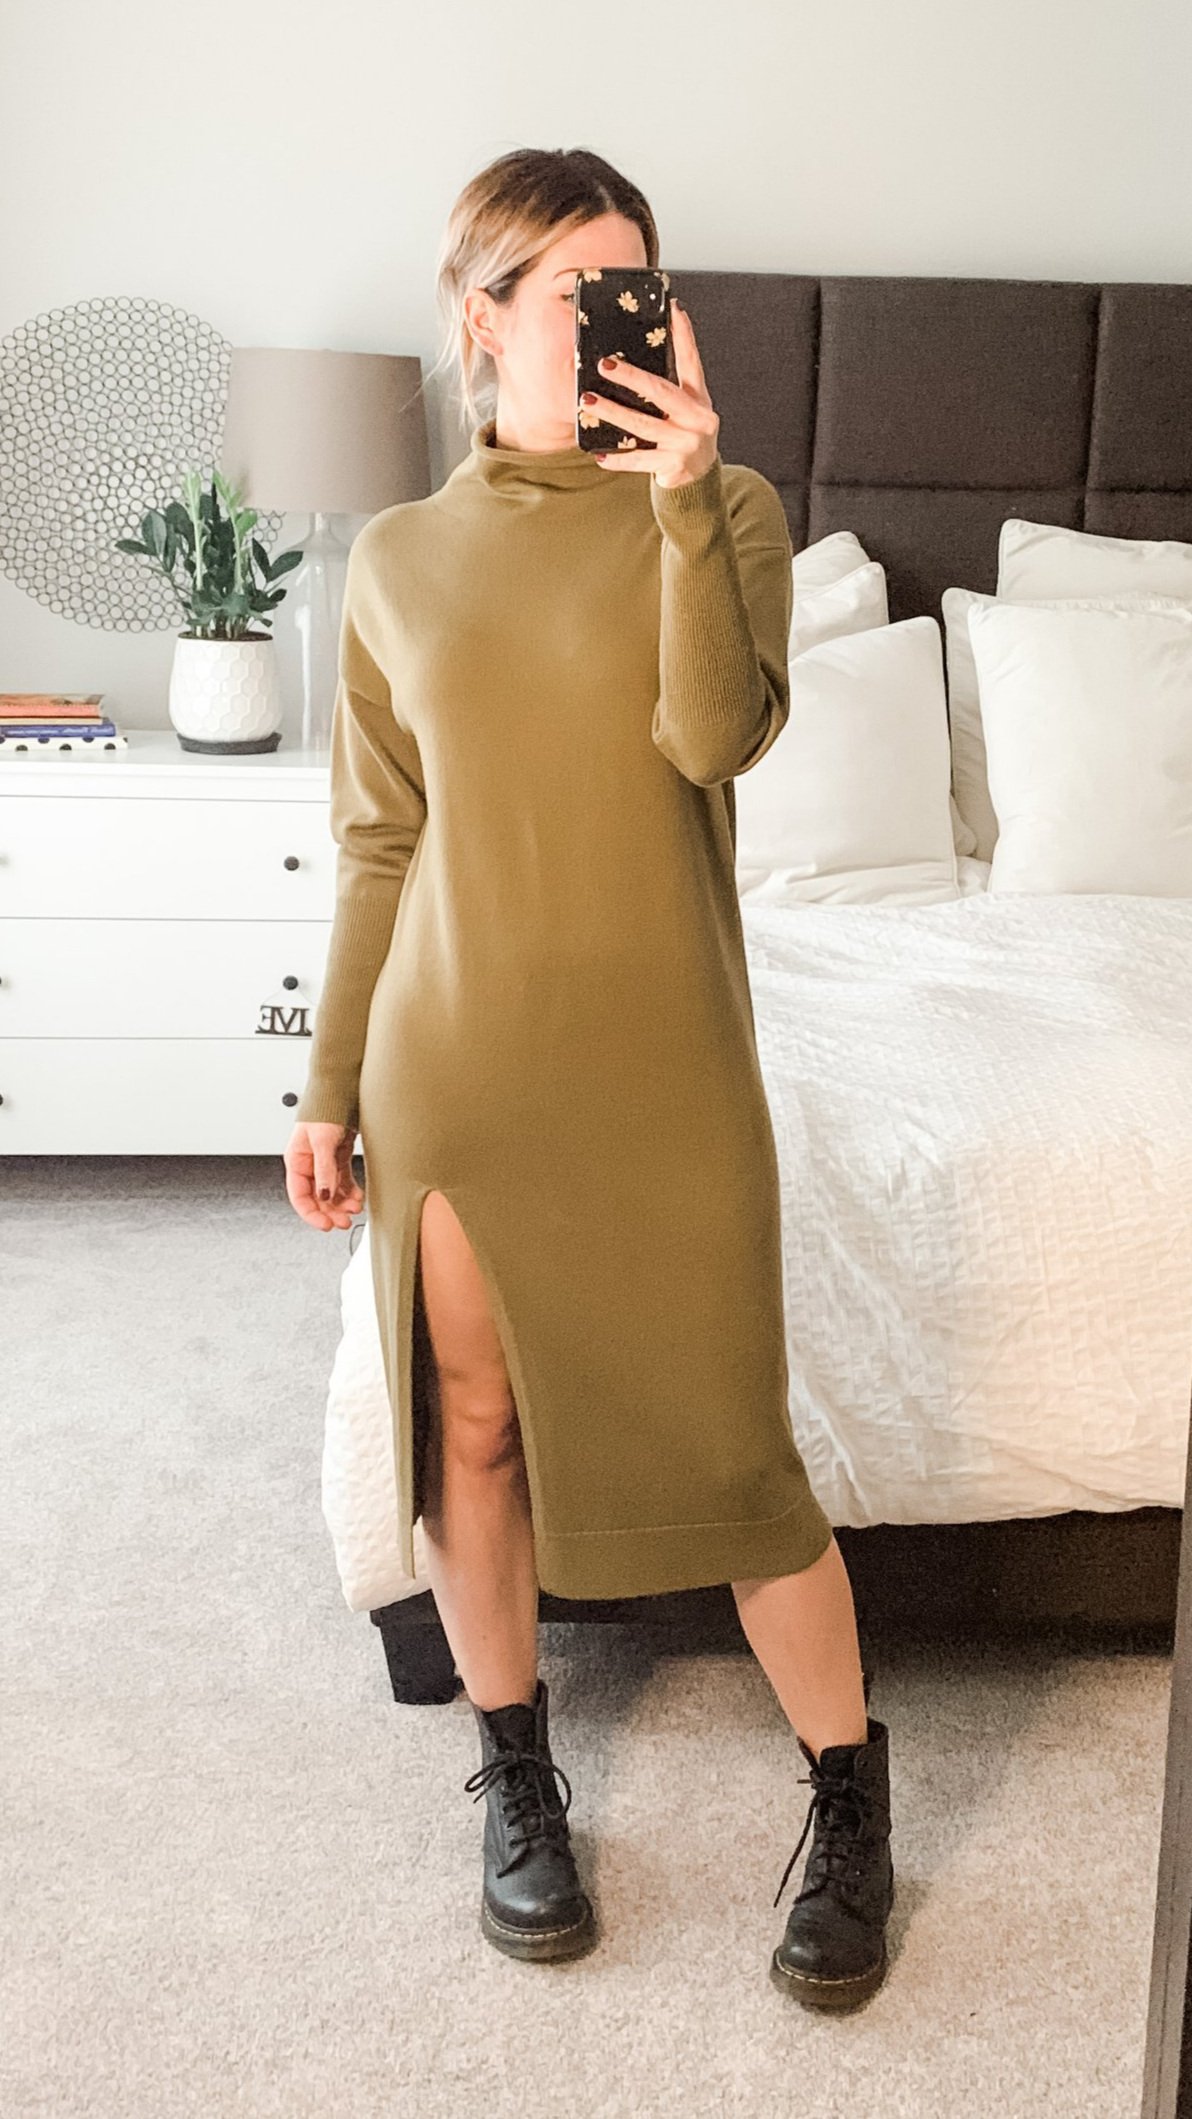 PAIR YOUR SWEATER DRESSES WITH YOUR COMBAT/FLAT BOOTS